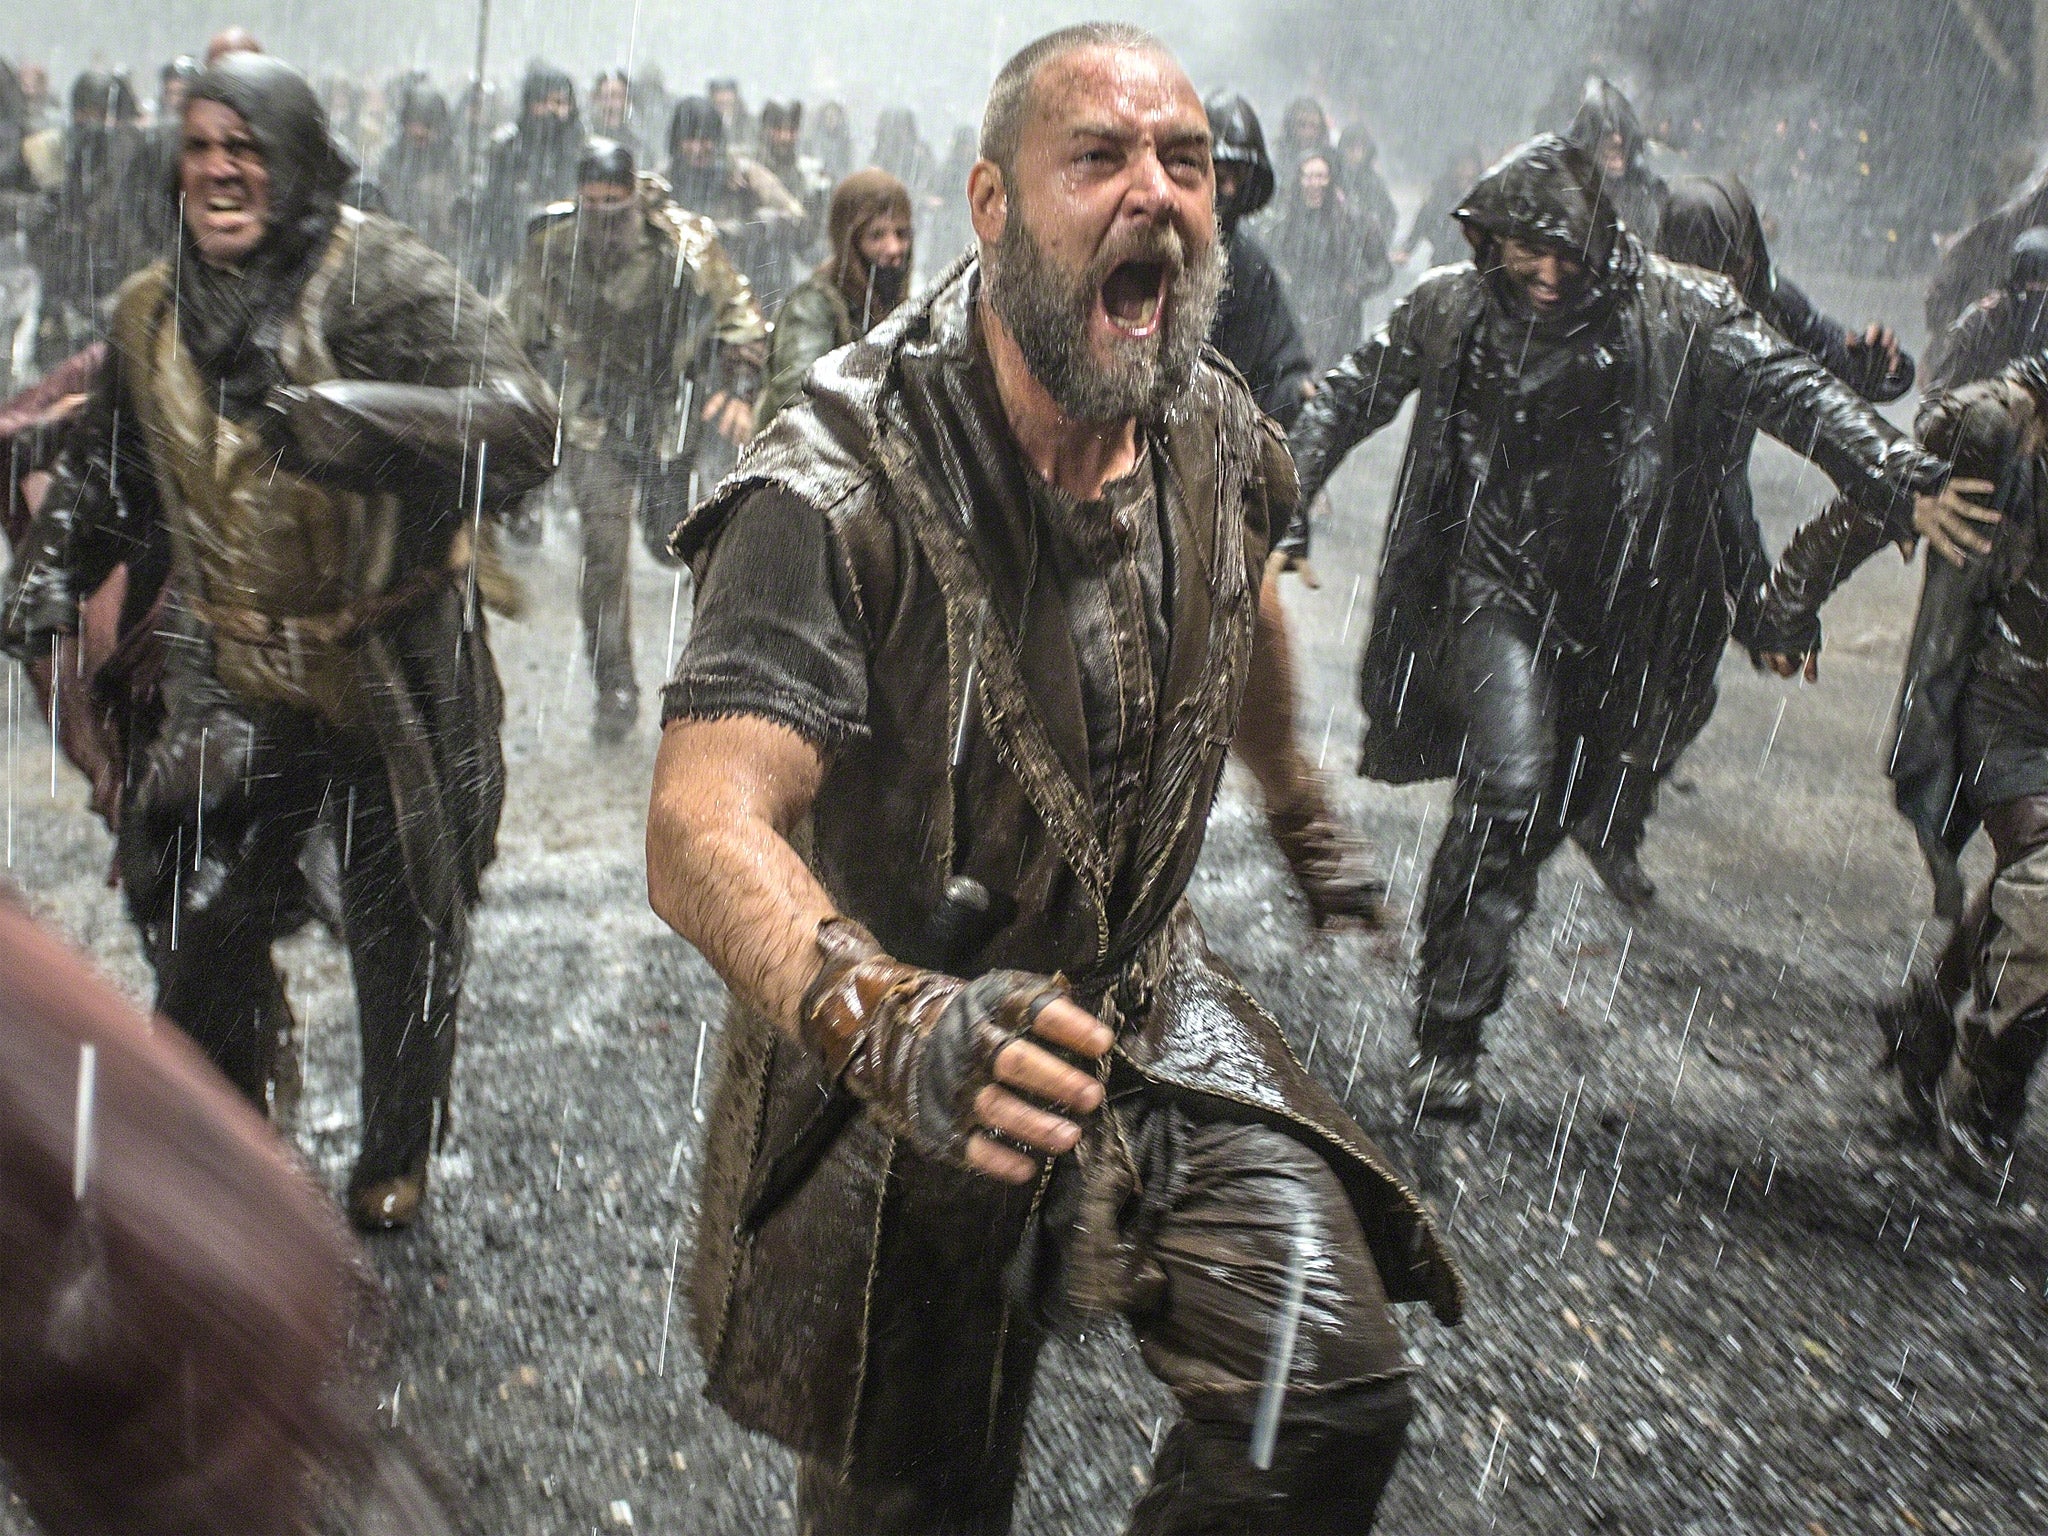 Why was a screening of the film 'Noah' cancelled in Exeter on 7 April?